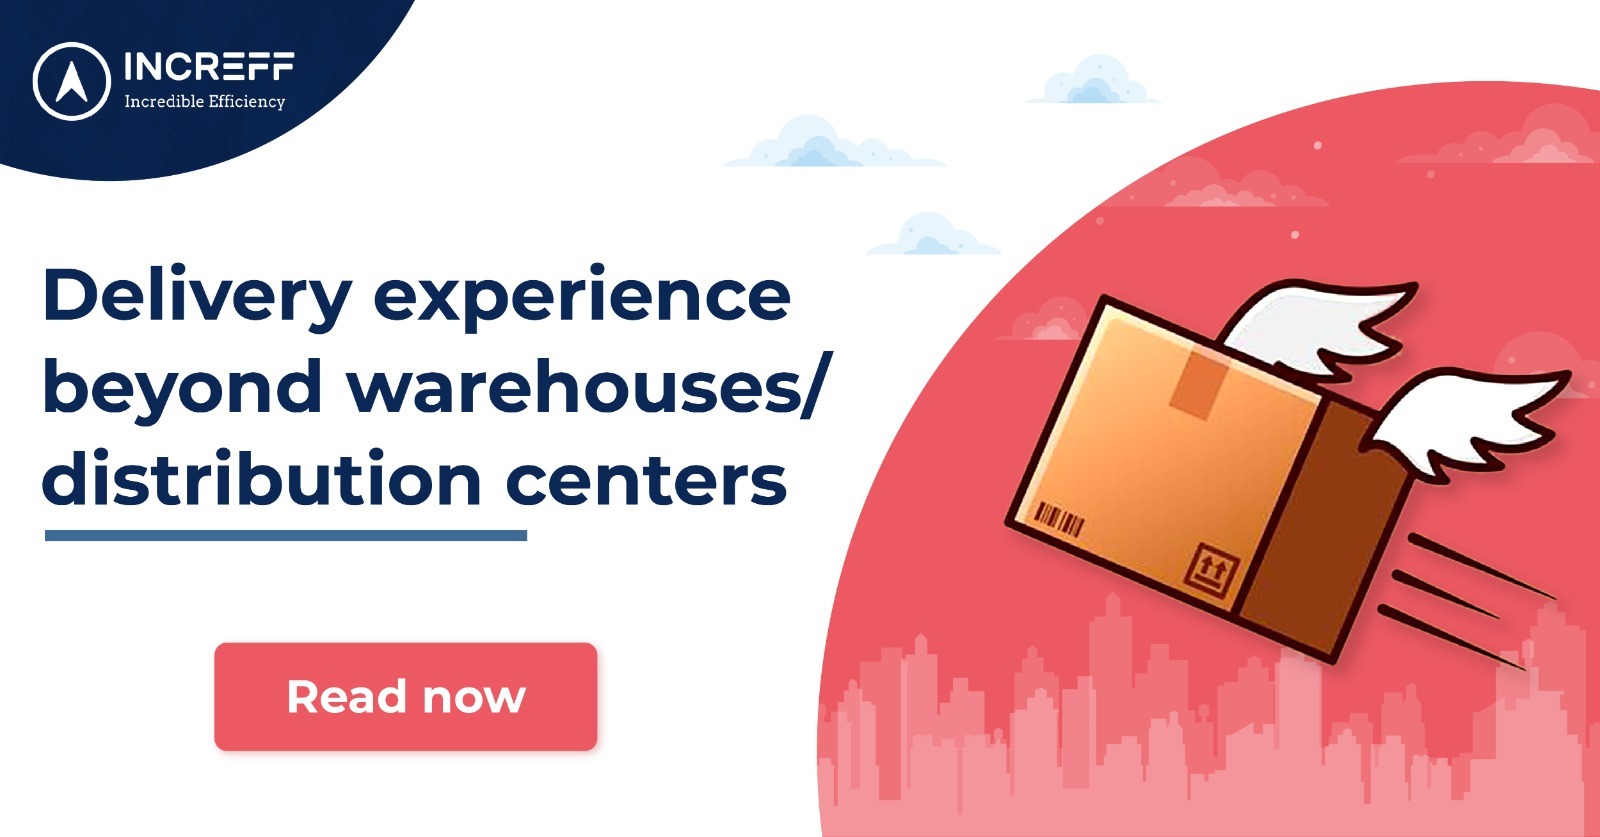 Upgrading delivery experience – Going beyond warehouses/ distribution centers